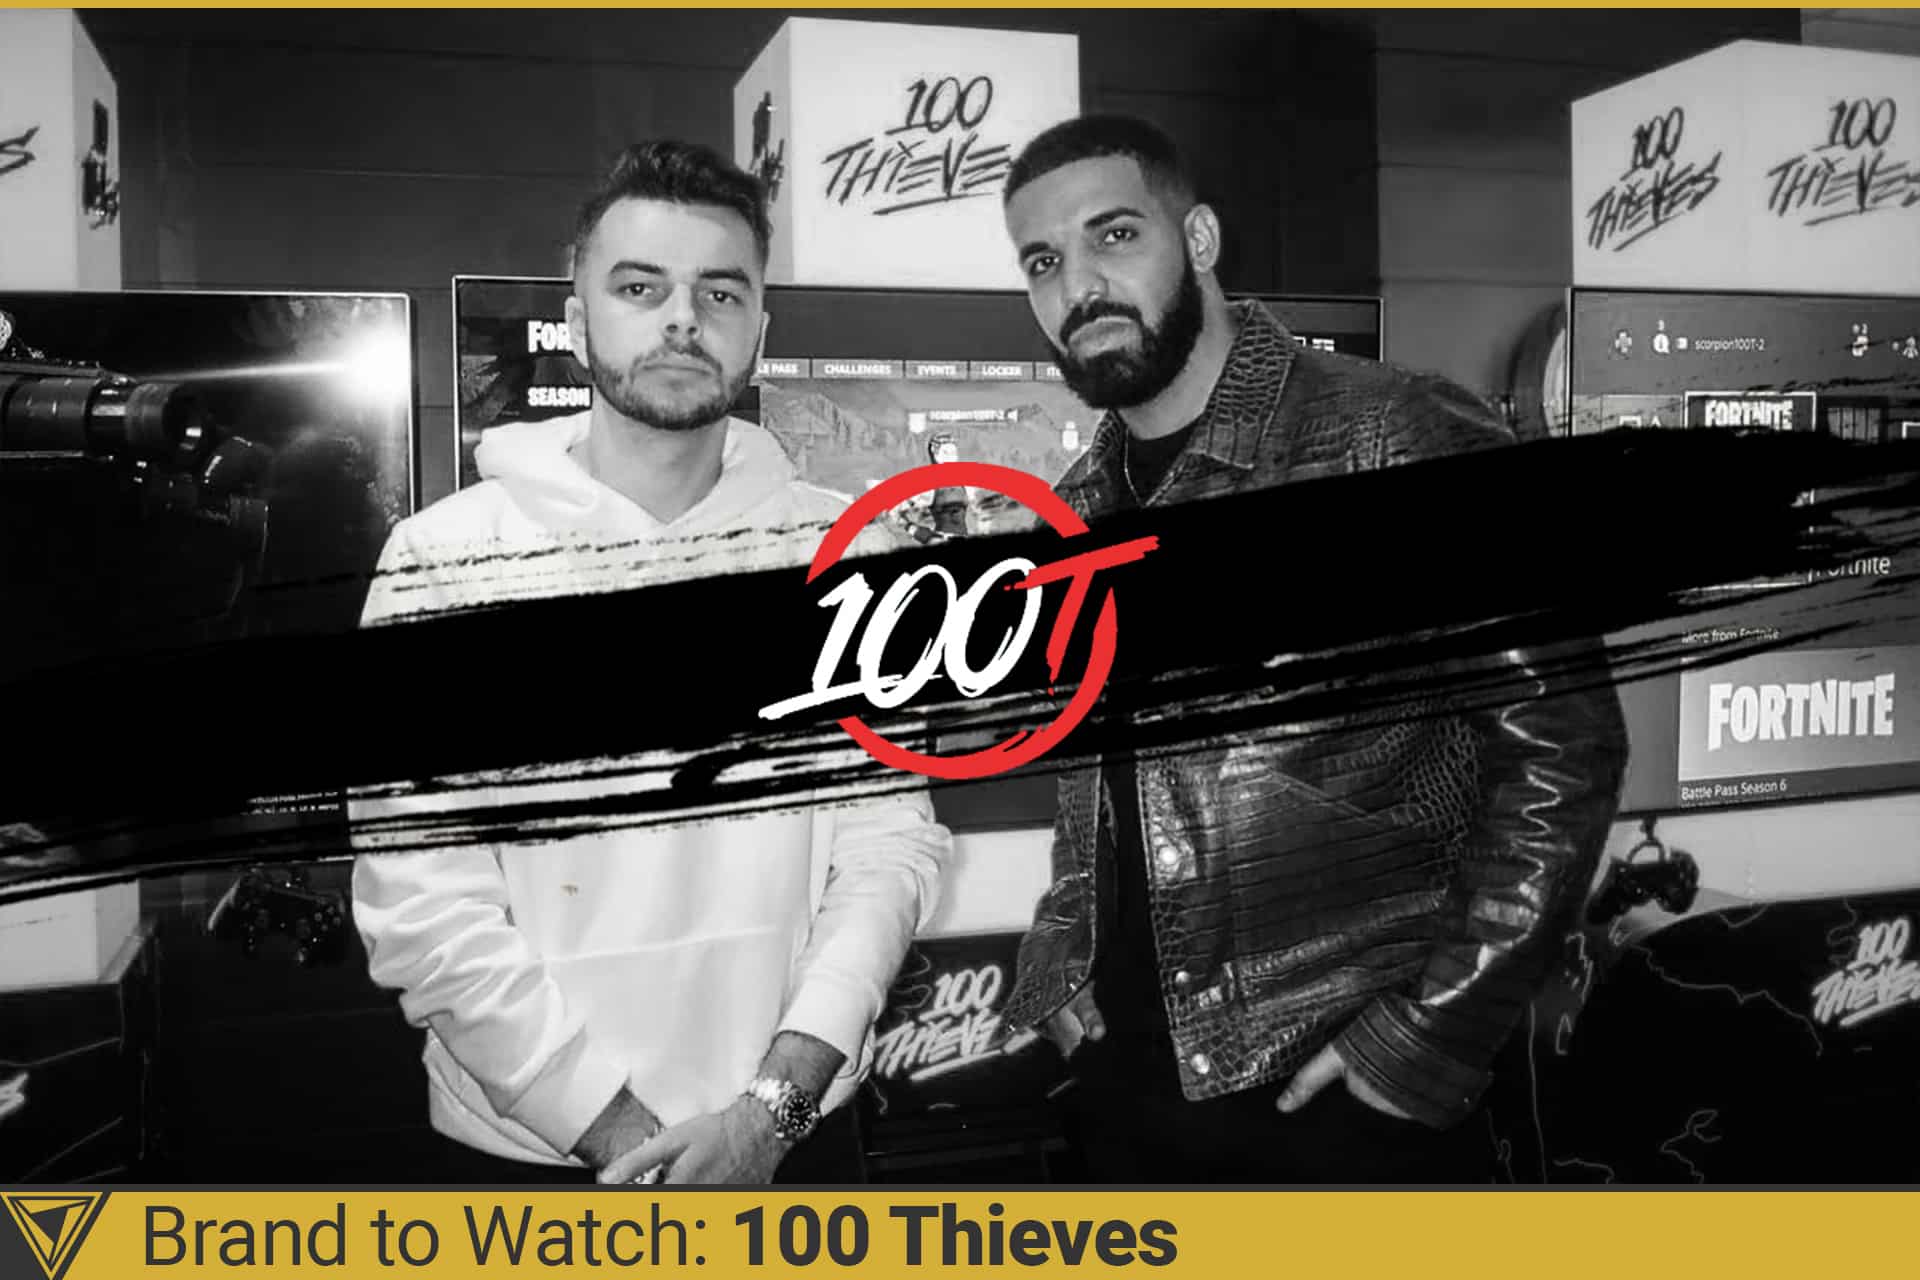 Get Ready to Shop at the 100 Thieves Official Shop